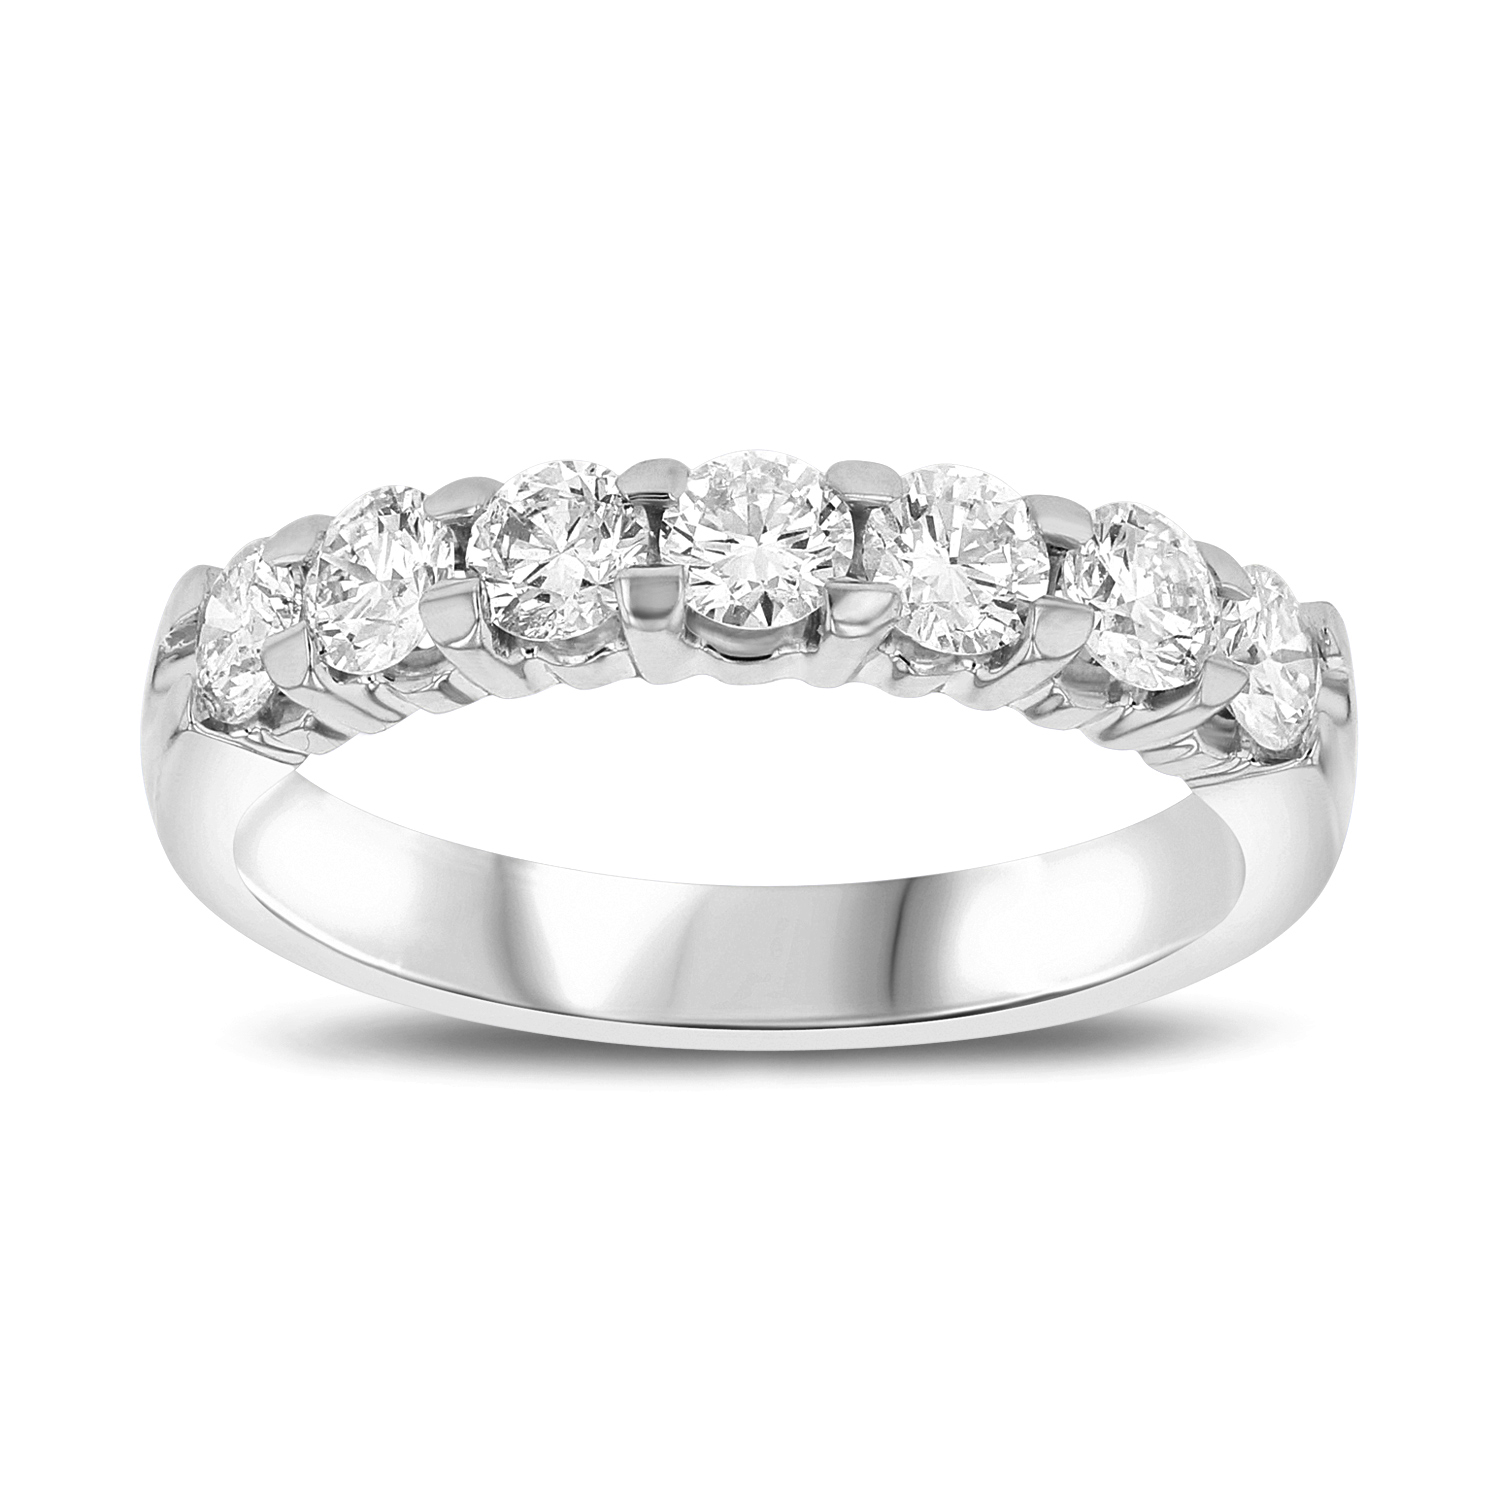 1.00ct tw 7 Stone Round Diamonds Shared Prong Anniversary or Wedding Band 14k Gold Bridal Ring H-J, SI